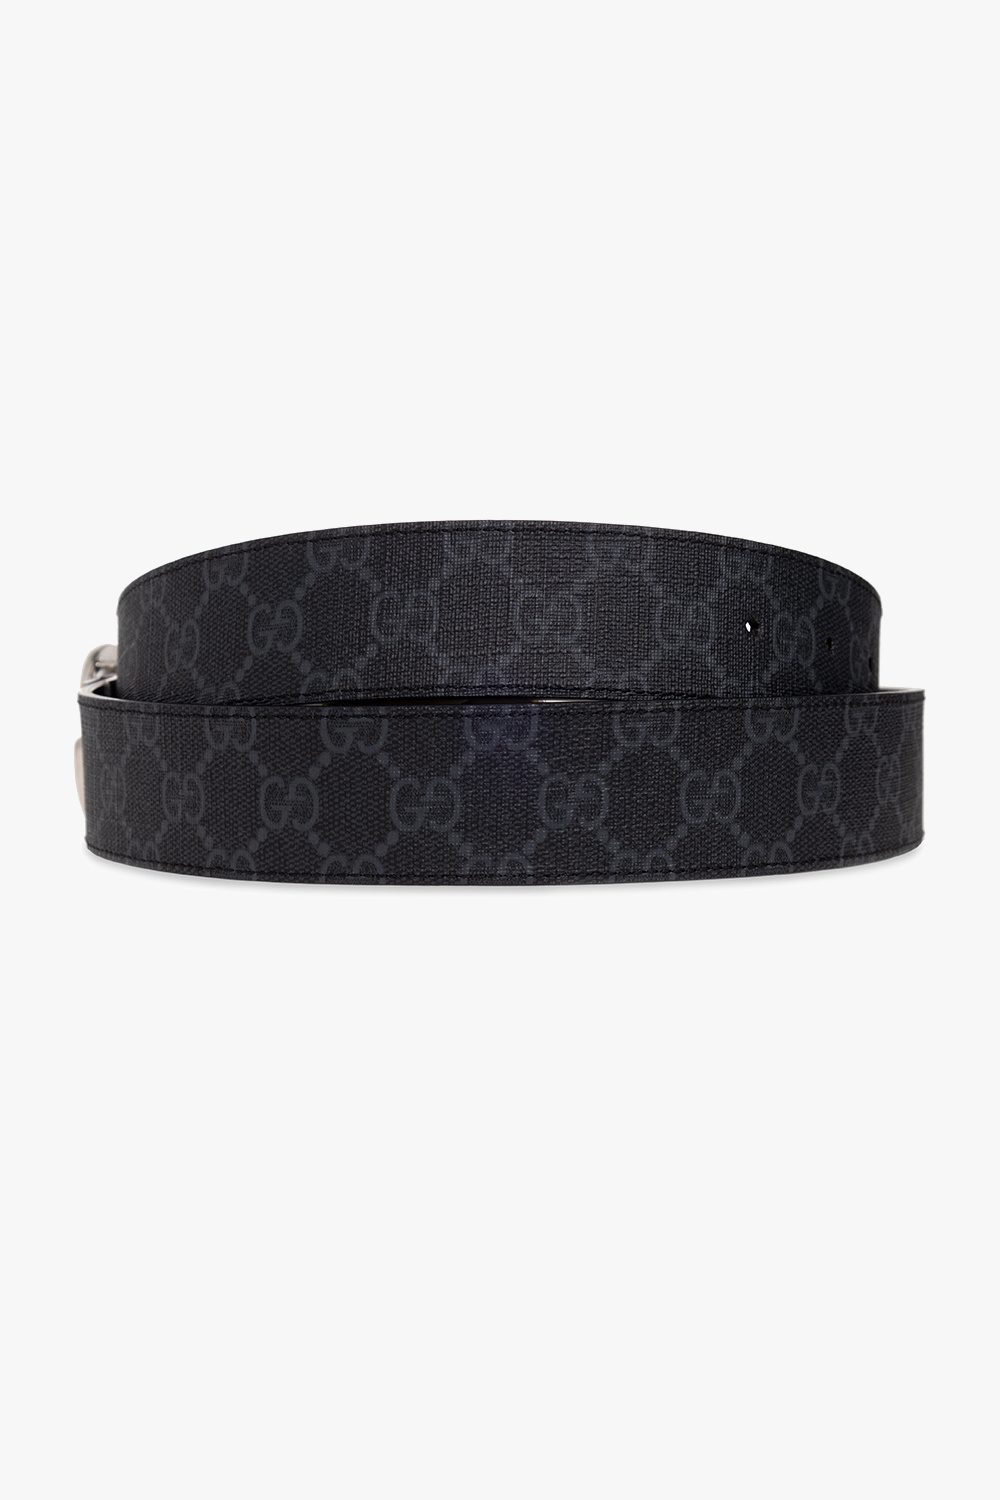 Gucci Reversible Belt with Square G Buckle GG Supreme Black